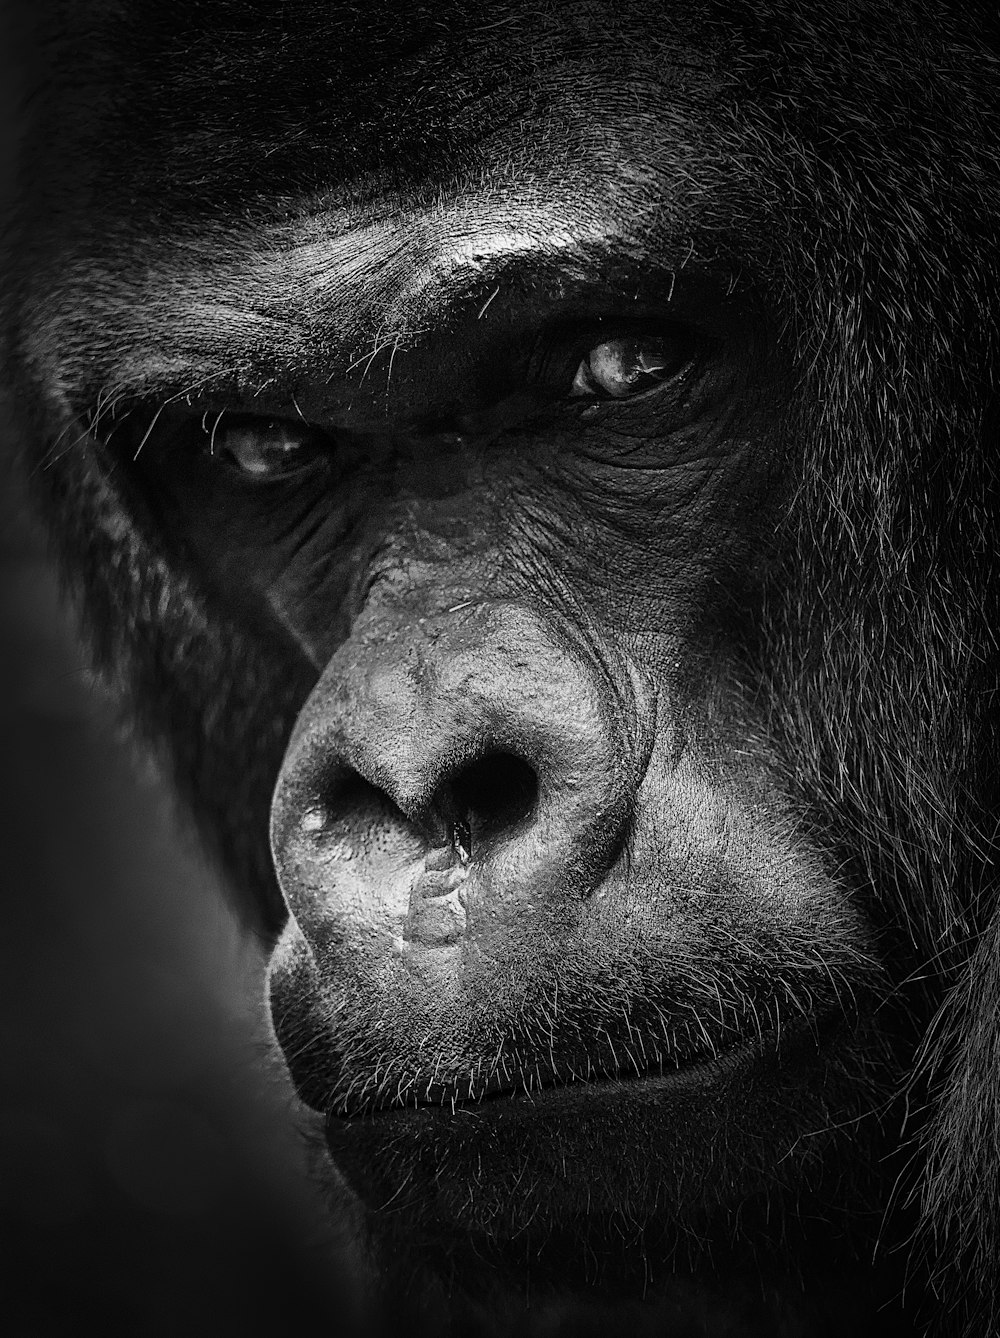 a black and white photo of a gorilla's face